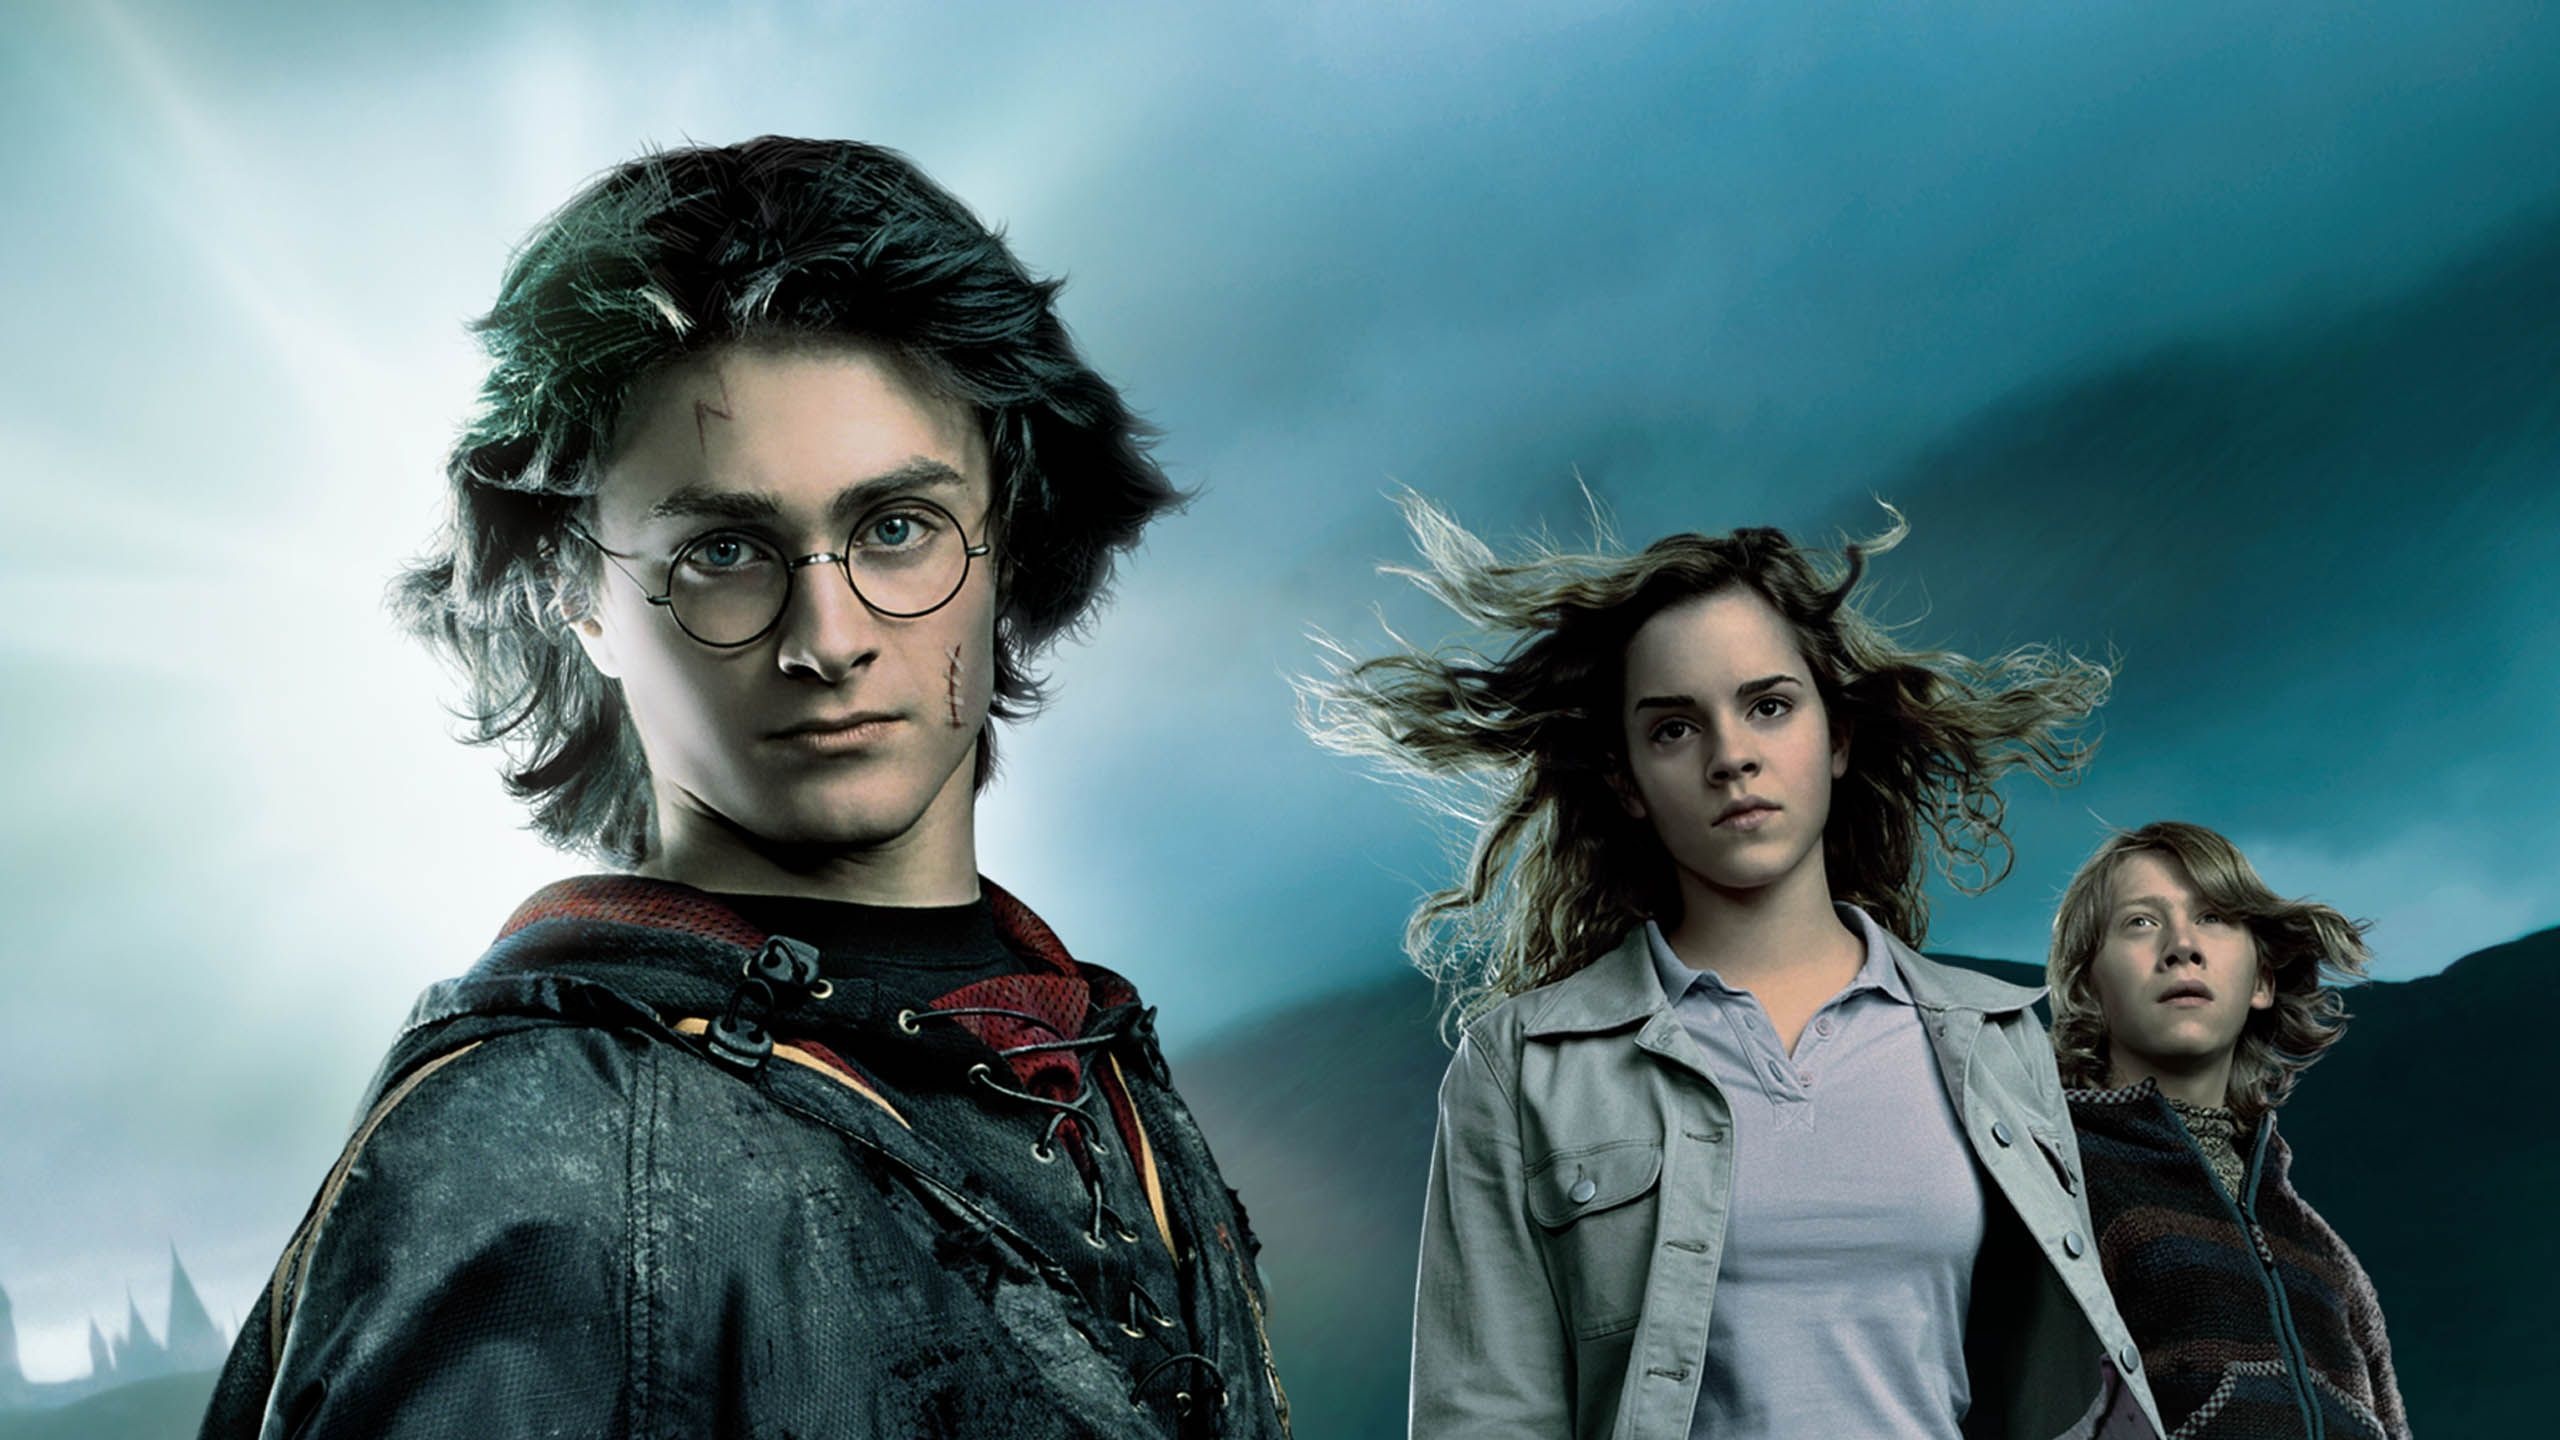 Goblet of Fire, Movies anywhere, 2560x1440 HD Desktop